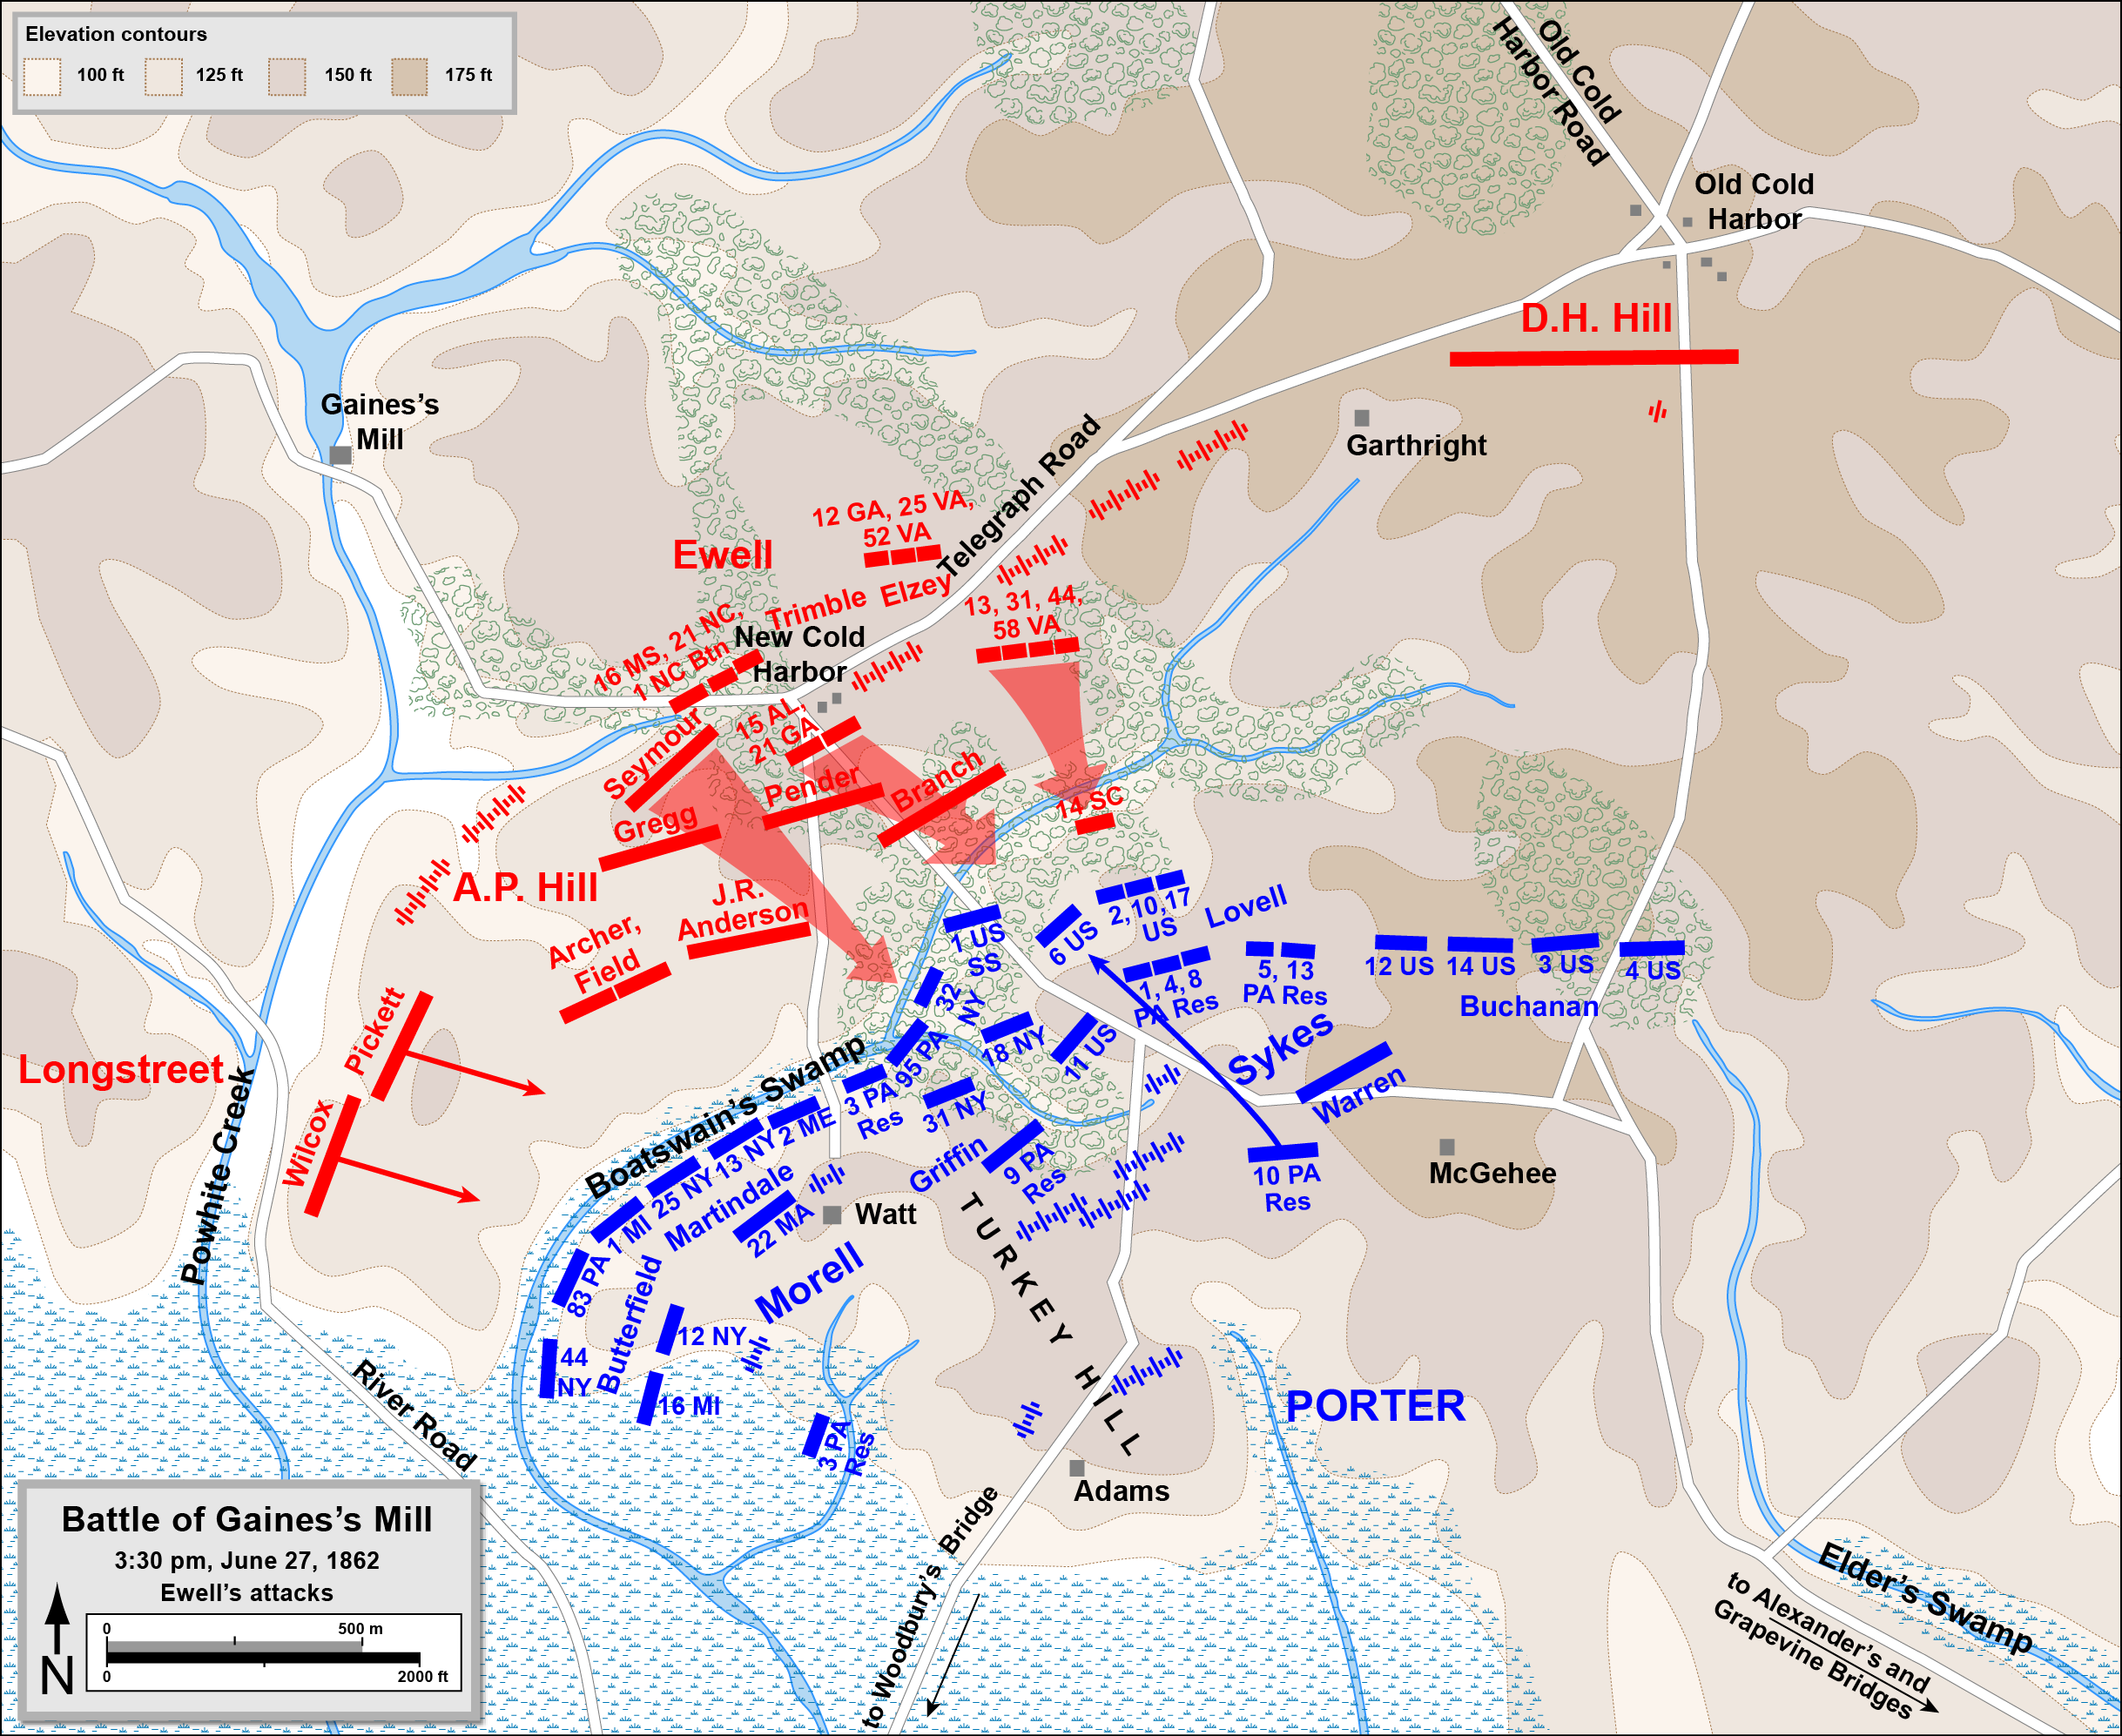 Battle of Gaines' Mill